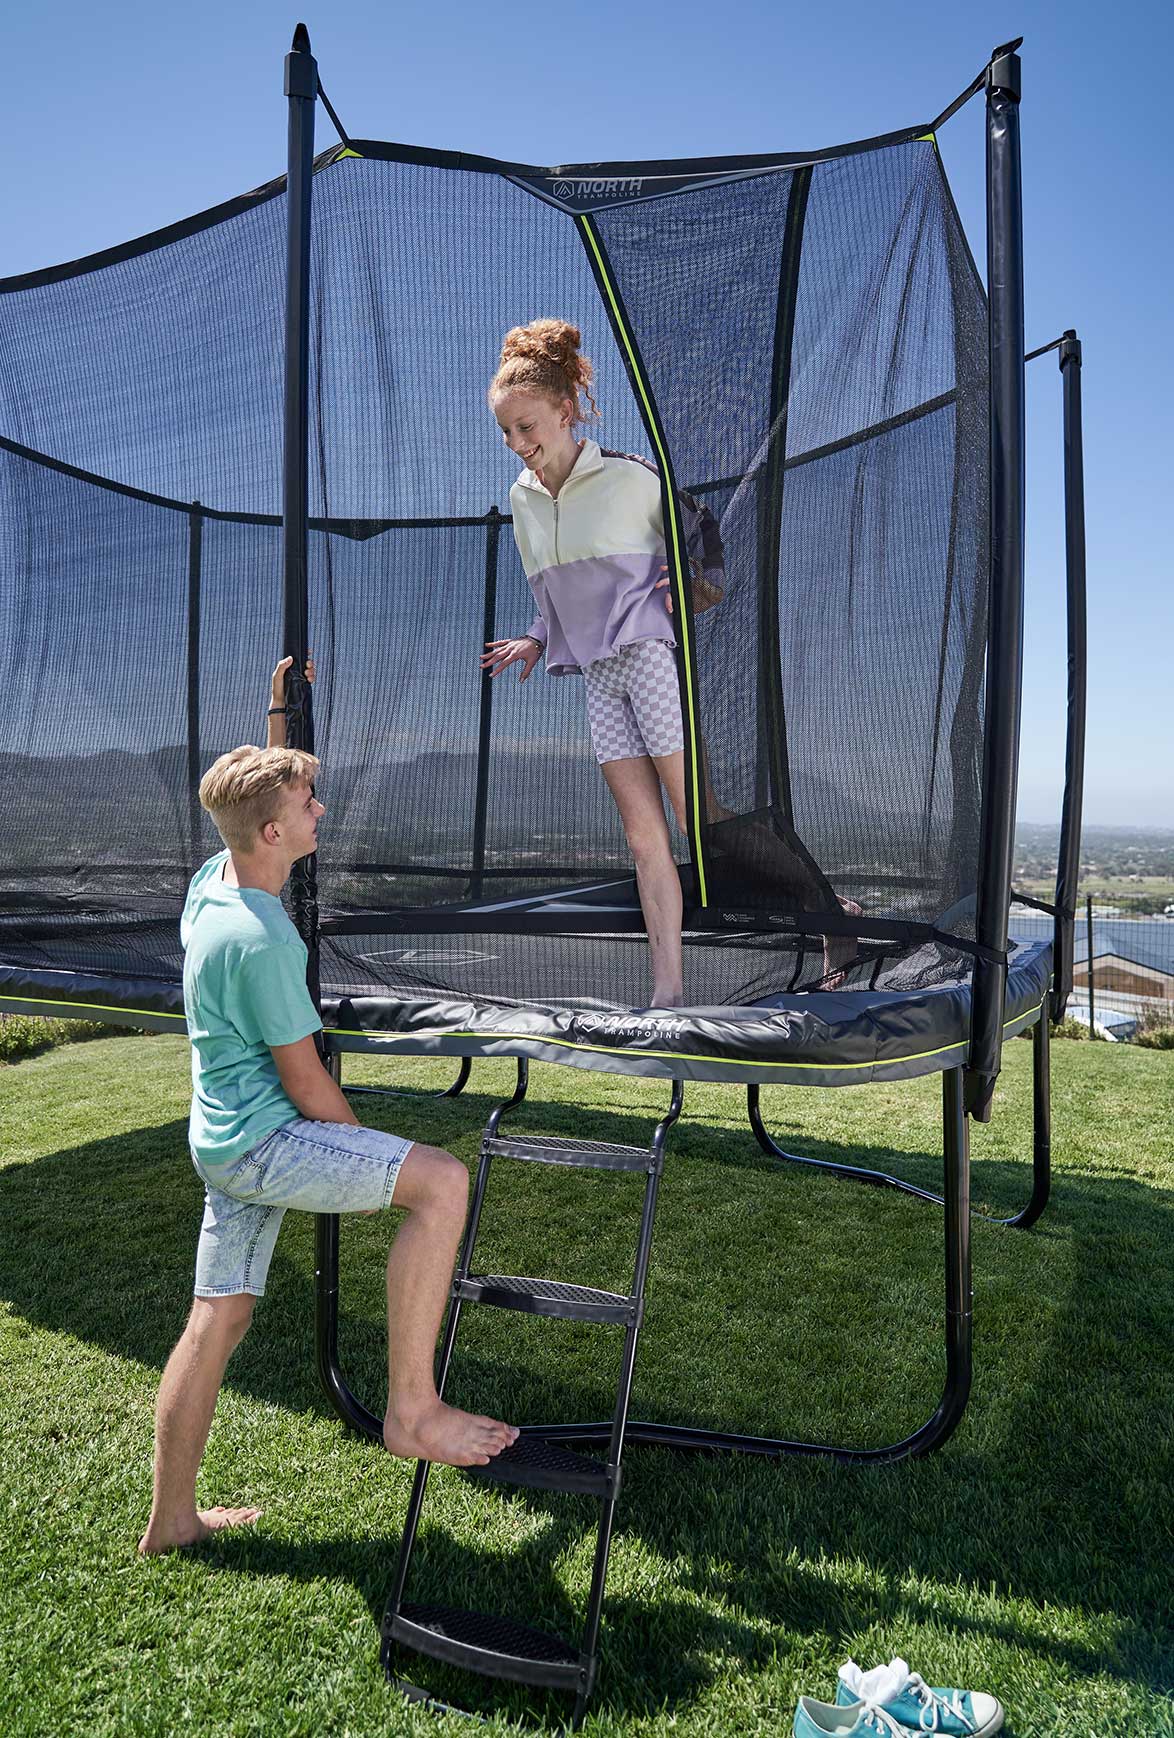 Designed for Athletes - For Families | North Trampoline USA – North Trampolines USA